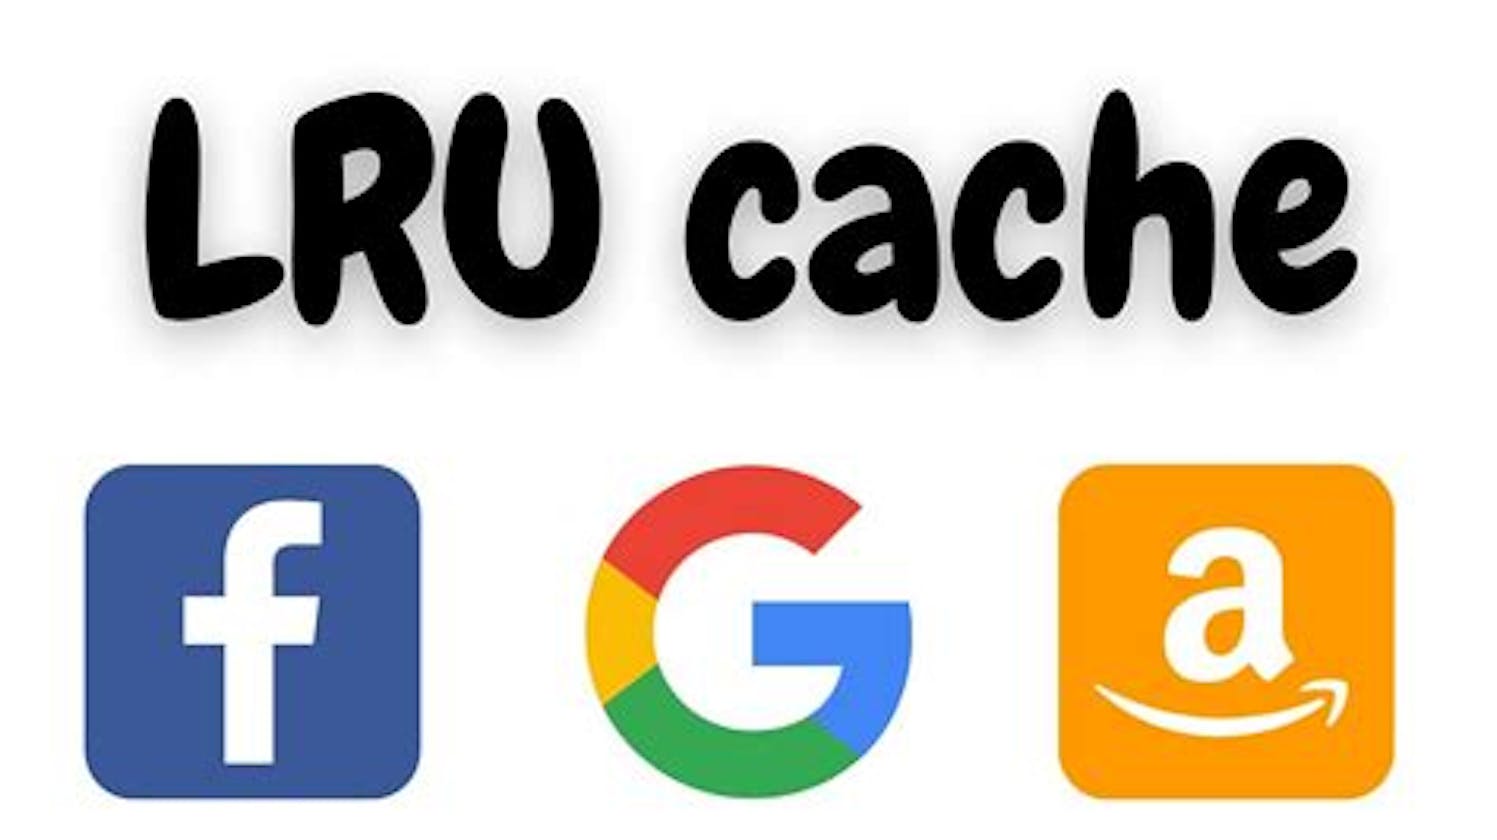 Different ways to implement LRU (Least Recently Used) Cache